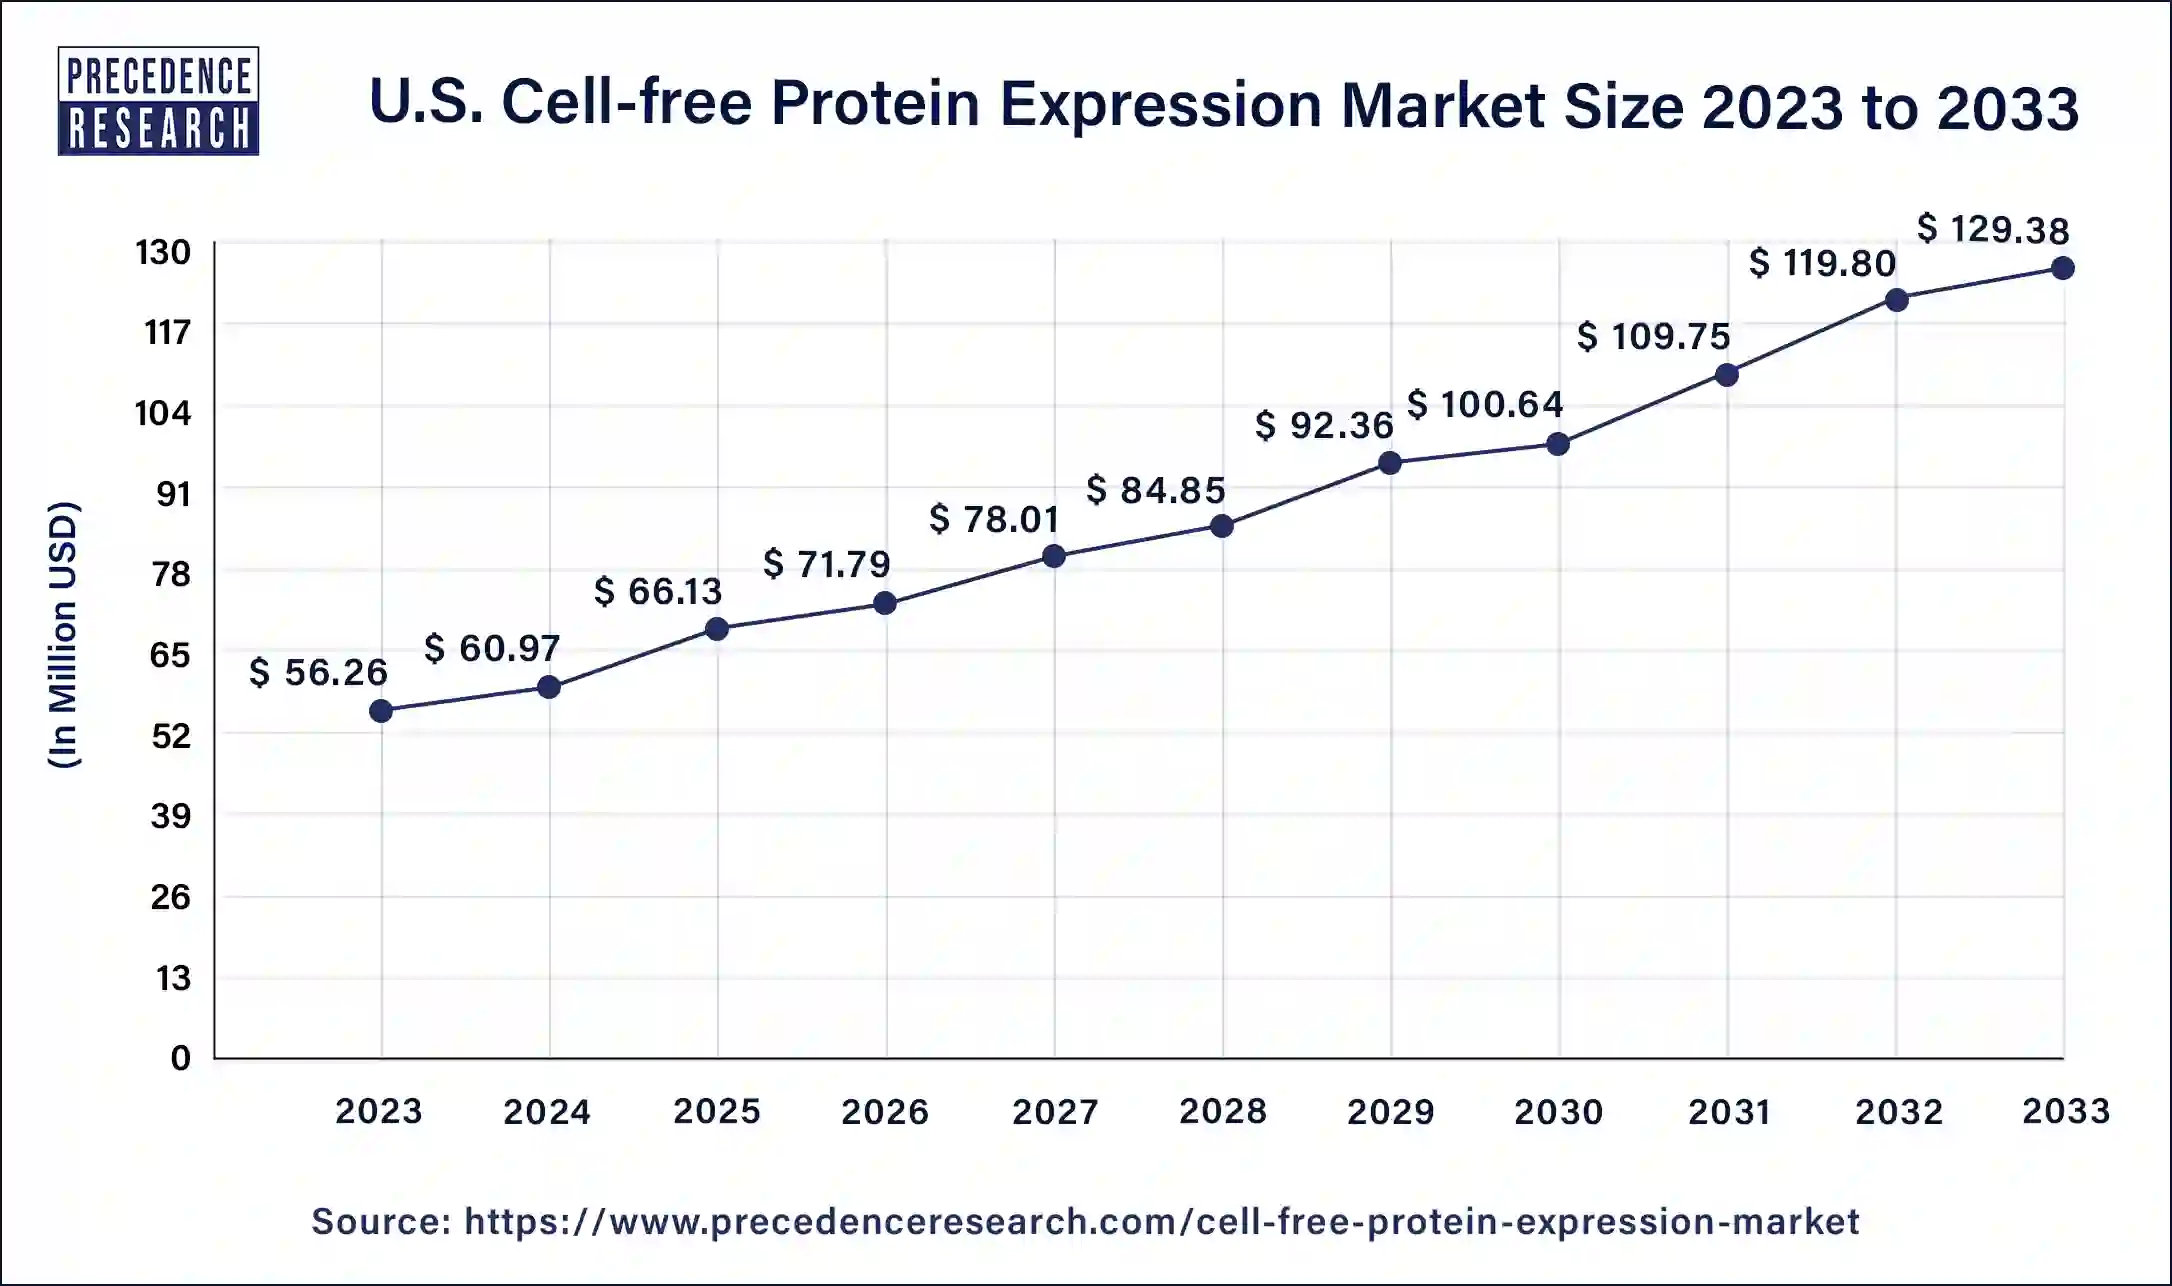 U.S. Cell-free Protein Expression Market Size 2024 to 2033